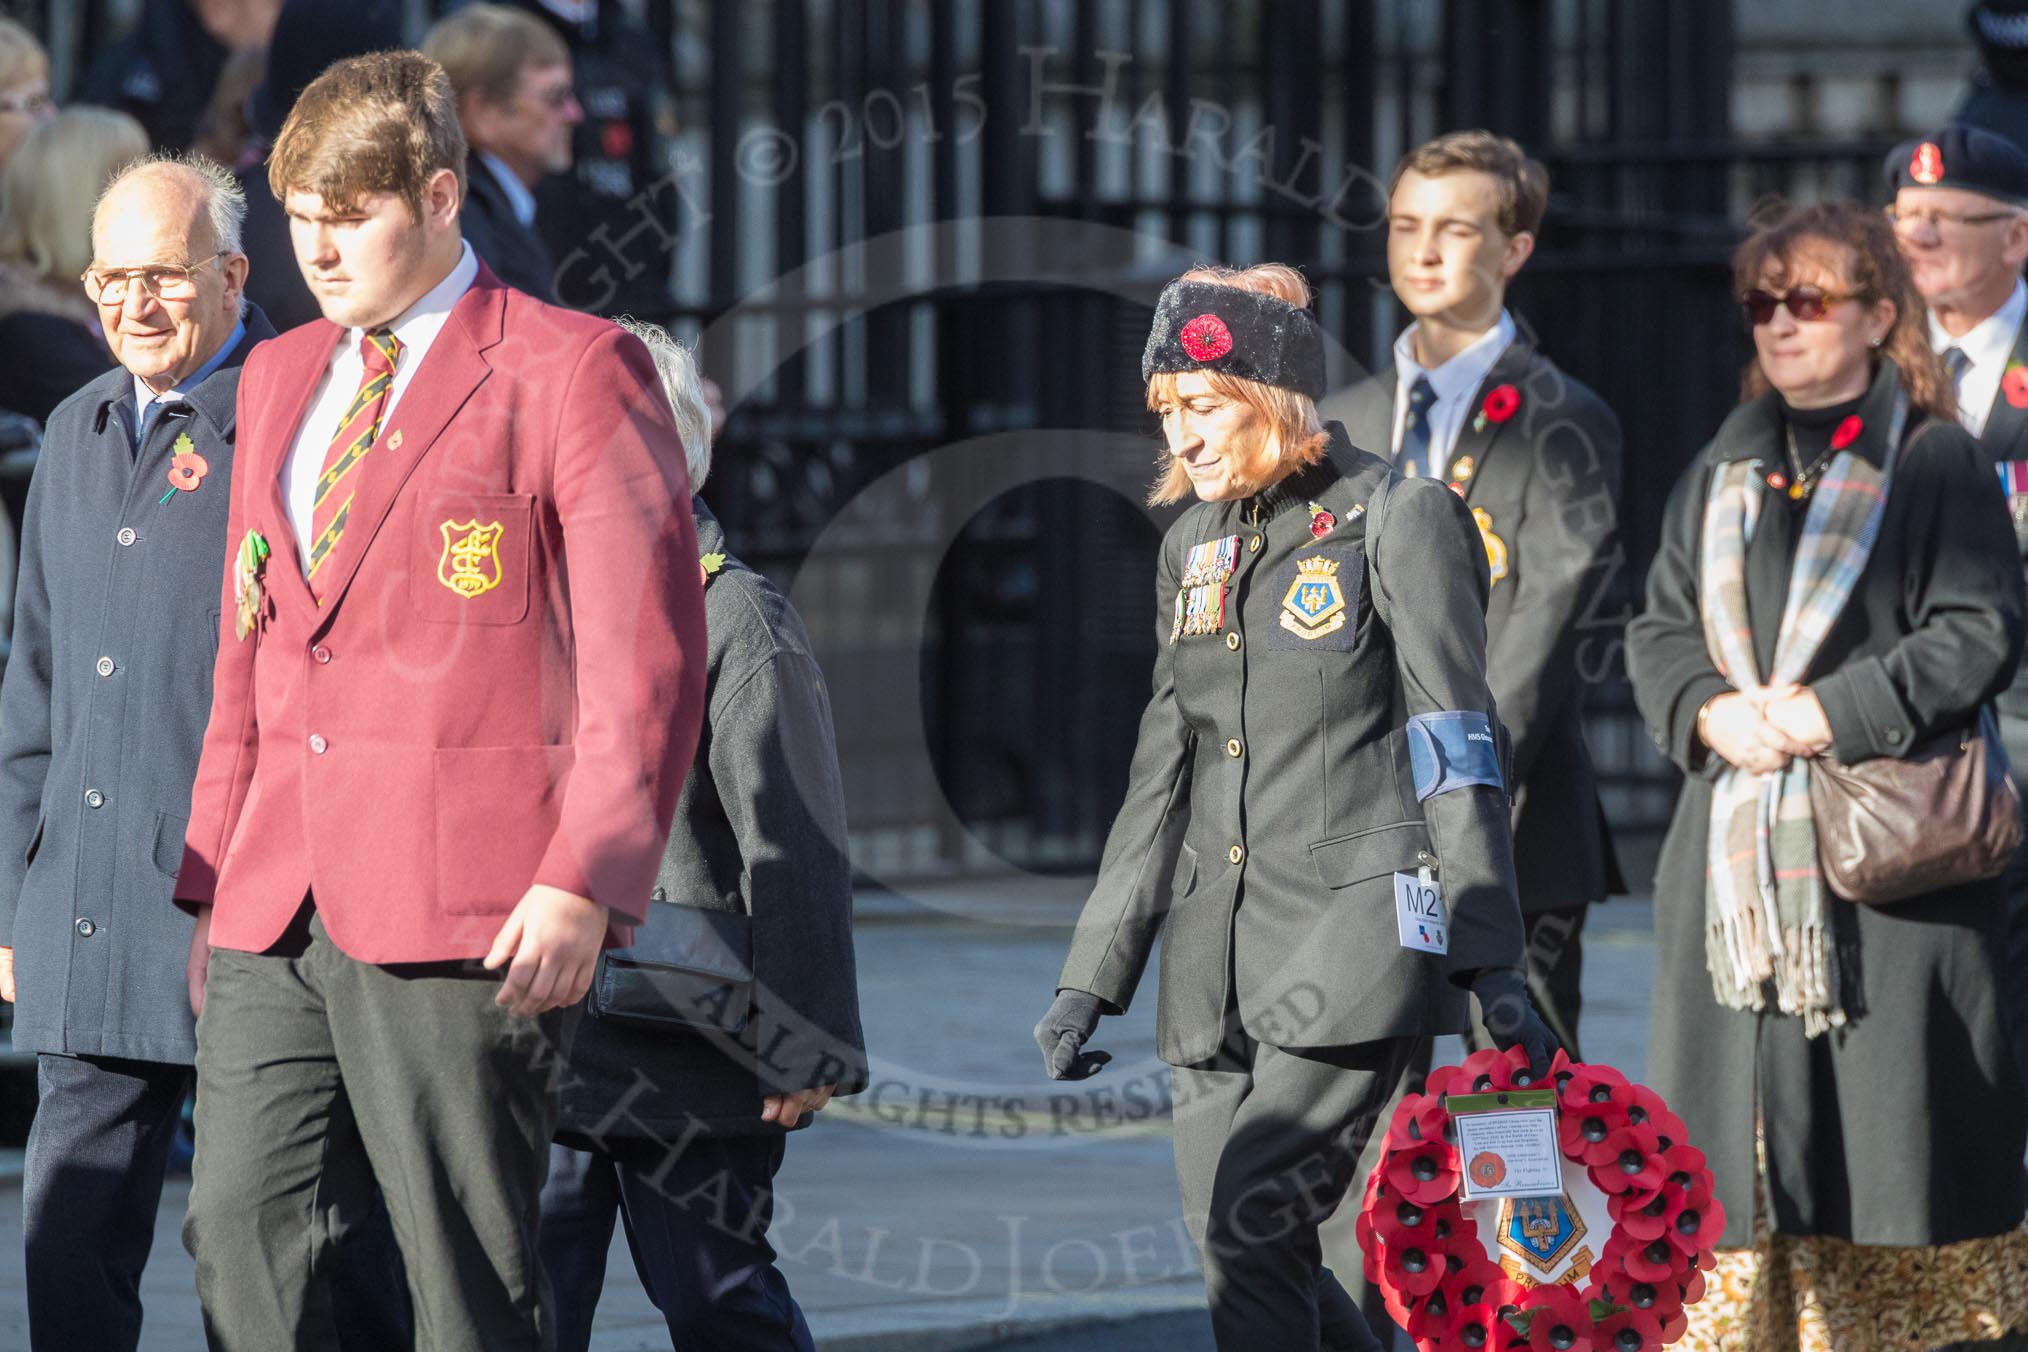 March Past, Remembrance Sunday at the Cenotaph 2016: M21 Fighting G Club.
Cenotaph, Whitehall, London SW1,
London,
Greater London,
United Kingdom,
on 13 November 2016 at 13:16, image #2657